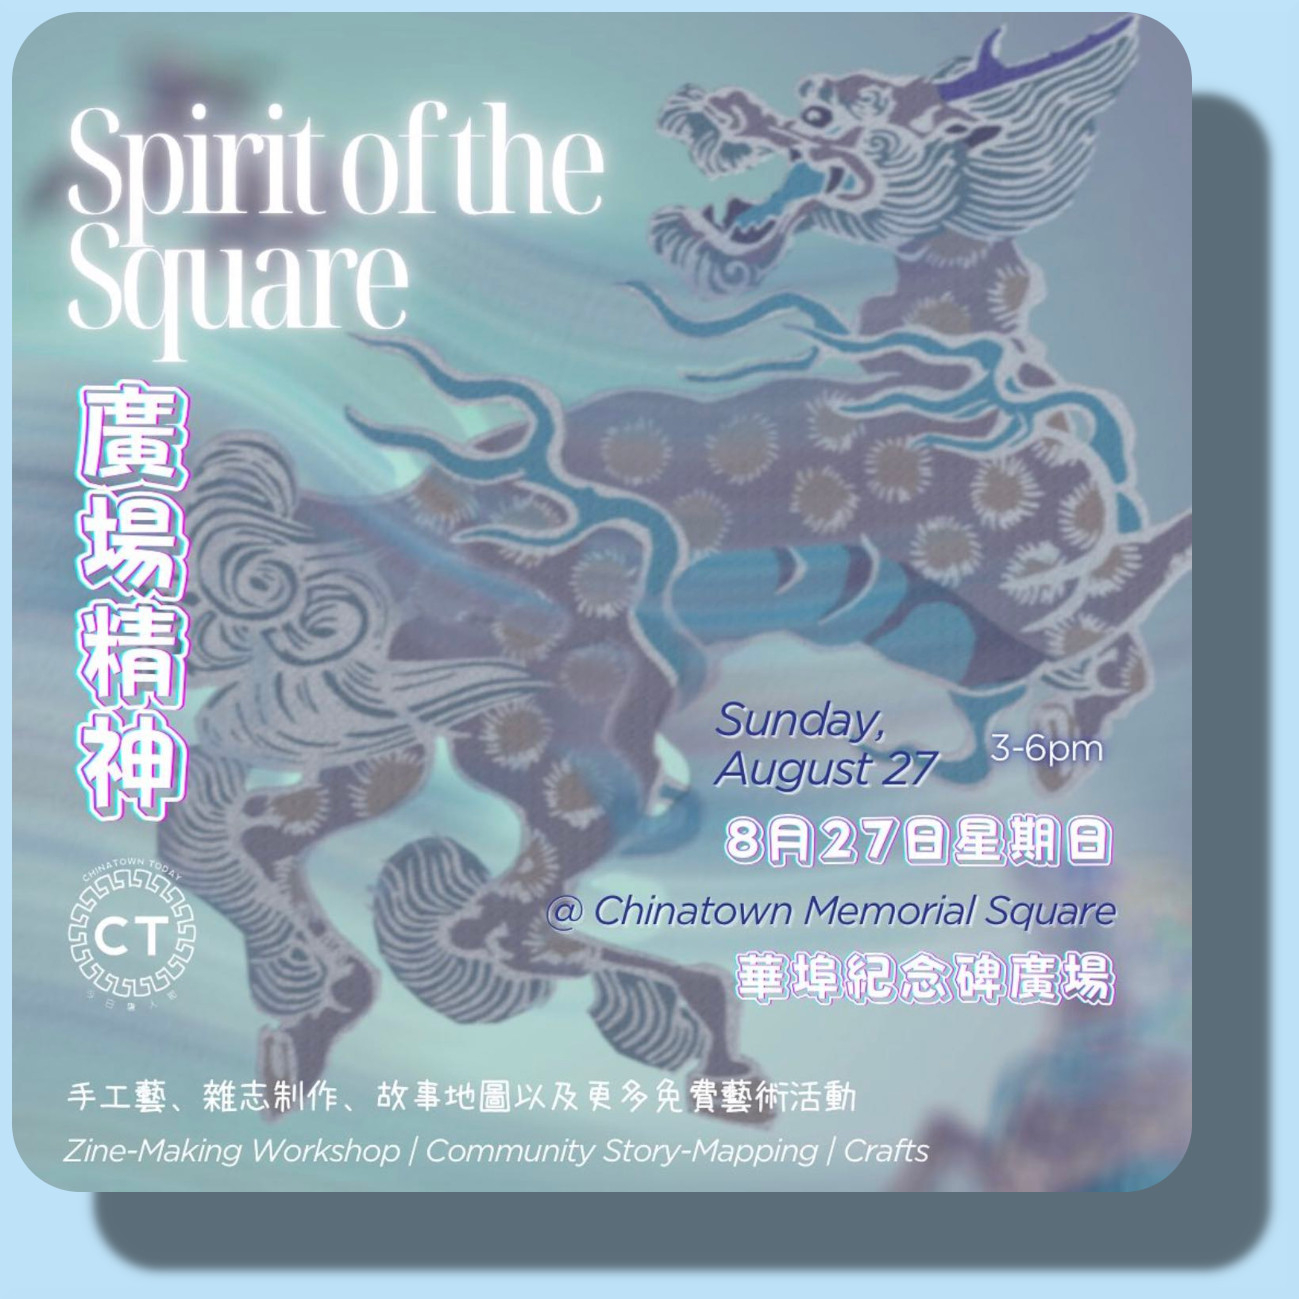 Spirit of the Square: Vancouver Chinatown Event | Aug 27